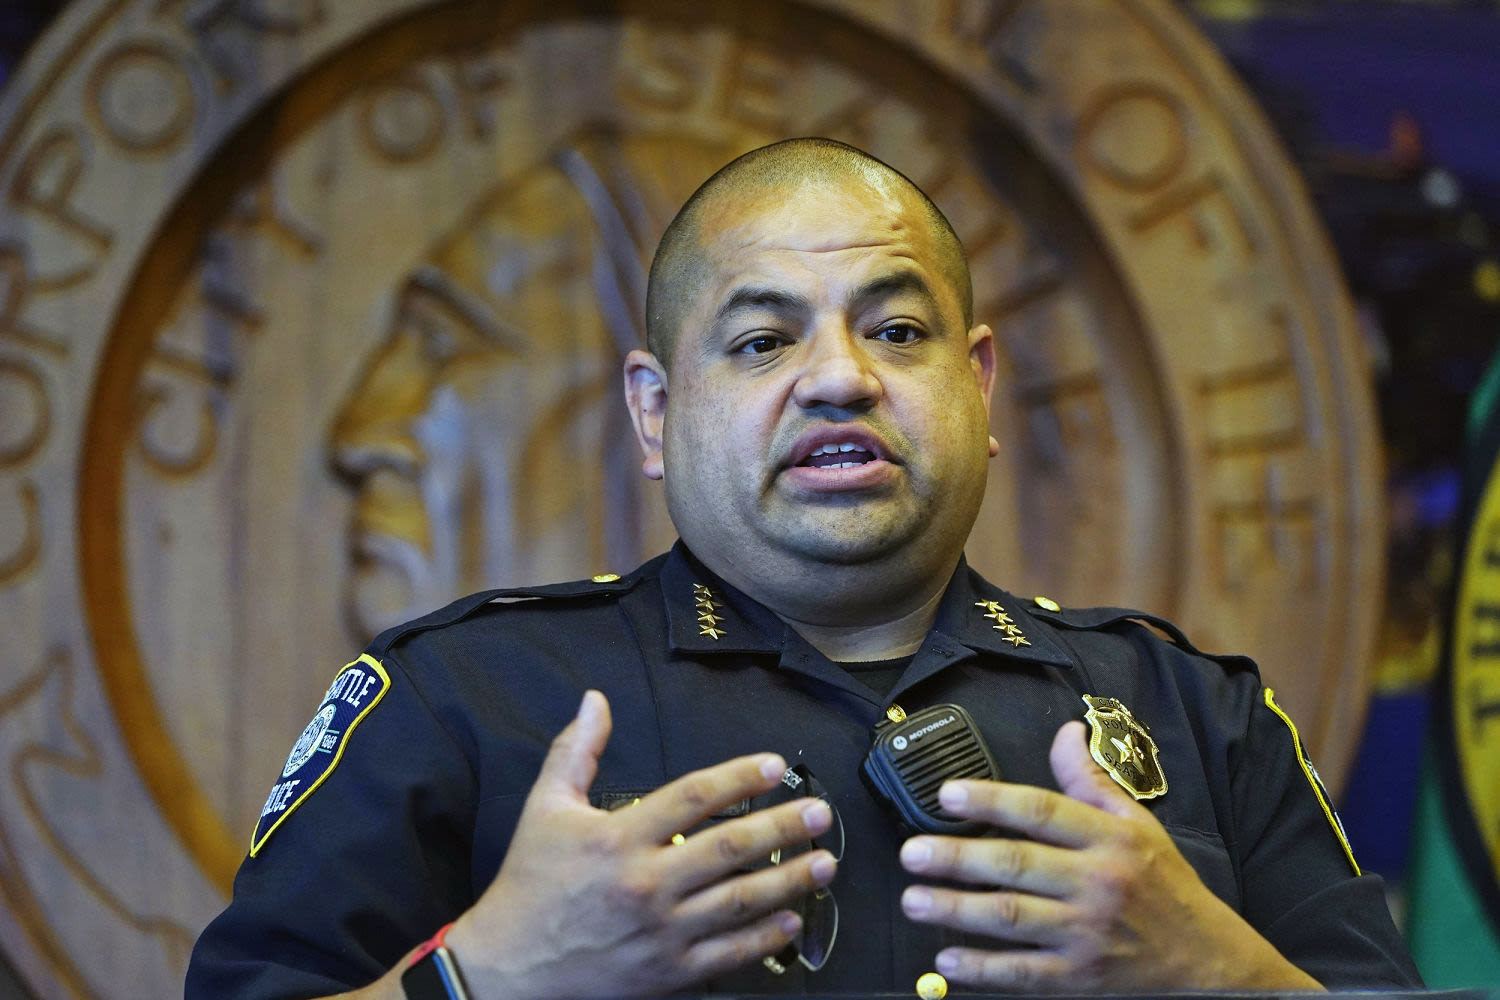 Seattle police chief removed amid discrimination, harassment lawsuits